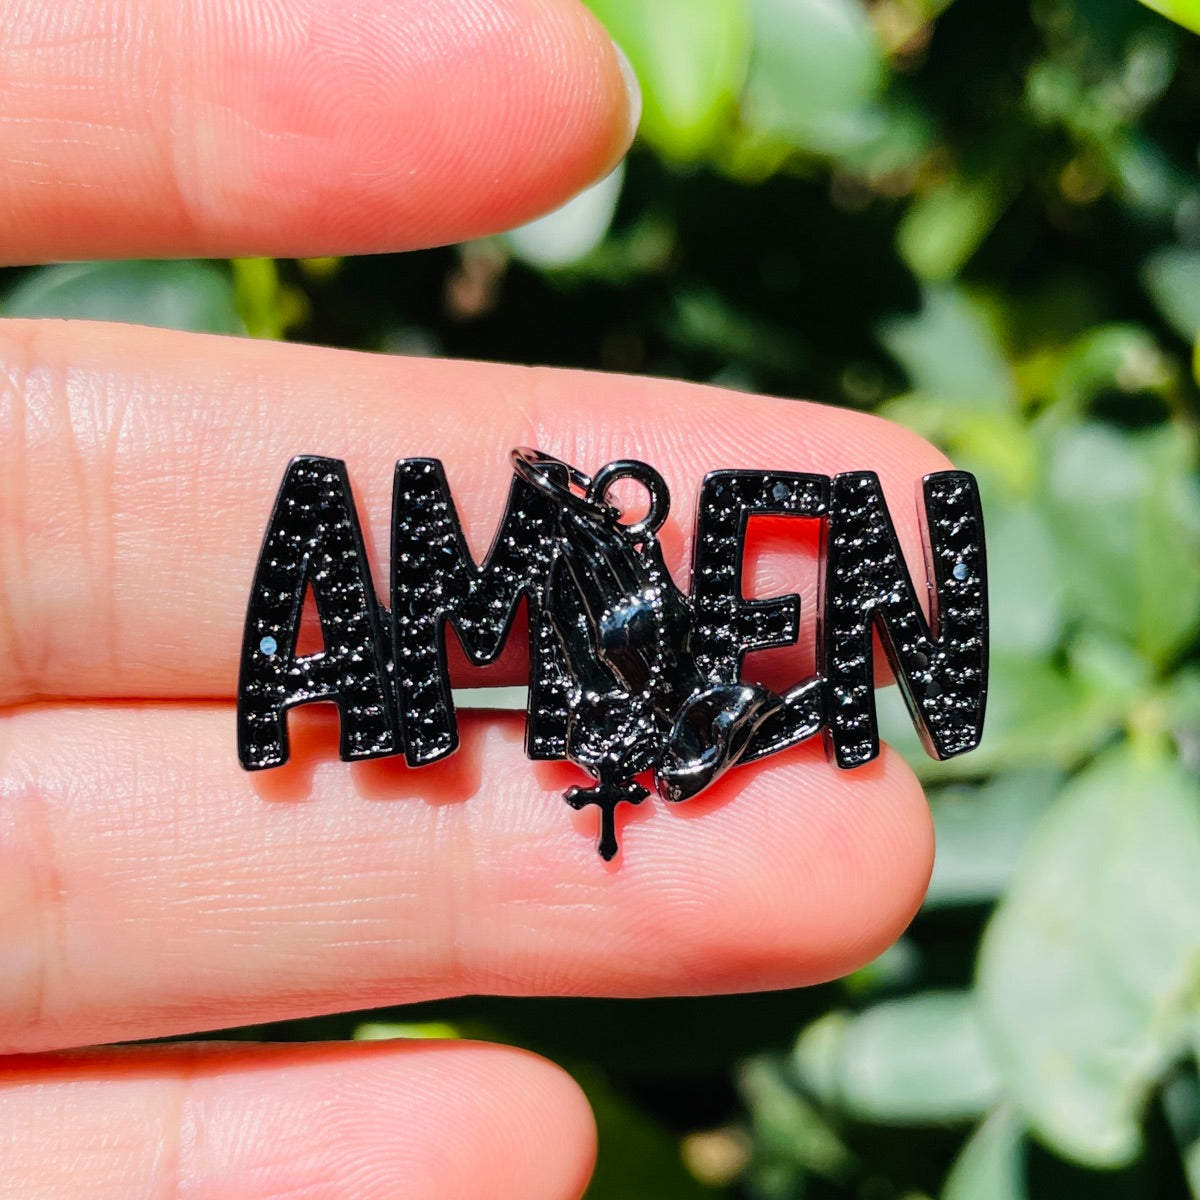 10pcs/lot CZ Pave Praying Hands Amen Word Charms Black on Black CZ Paved Charms Christian Quotes New Charms Arrivals Charms Beads Beyond